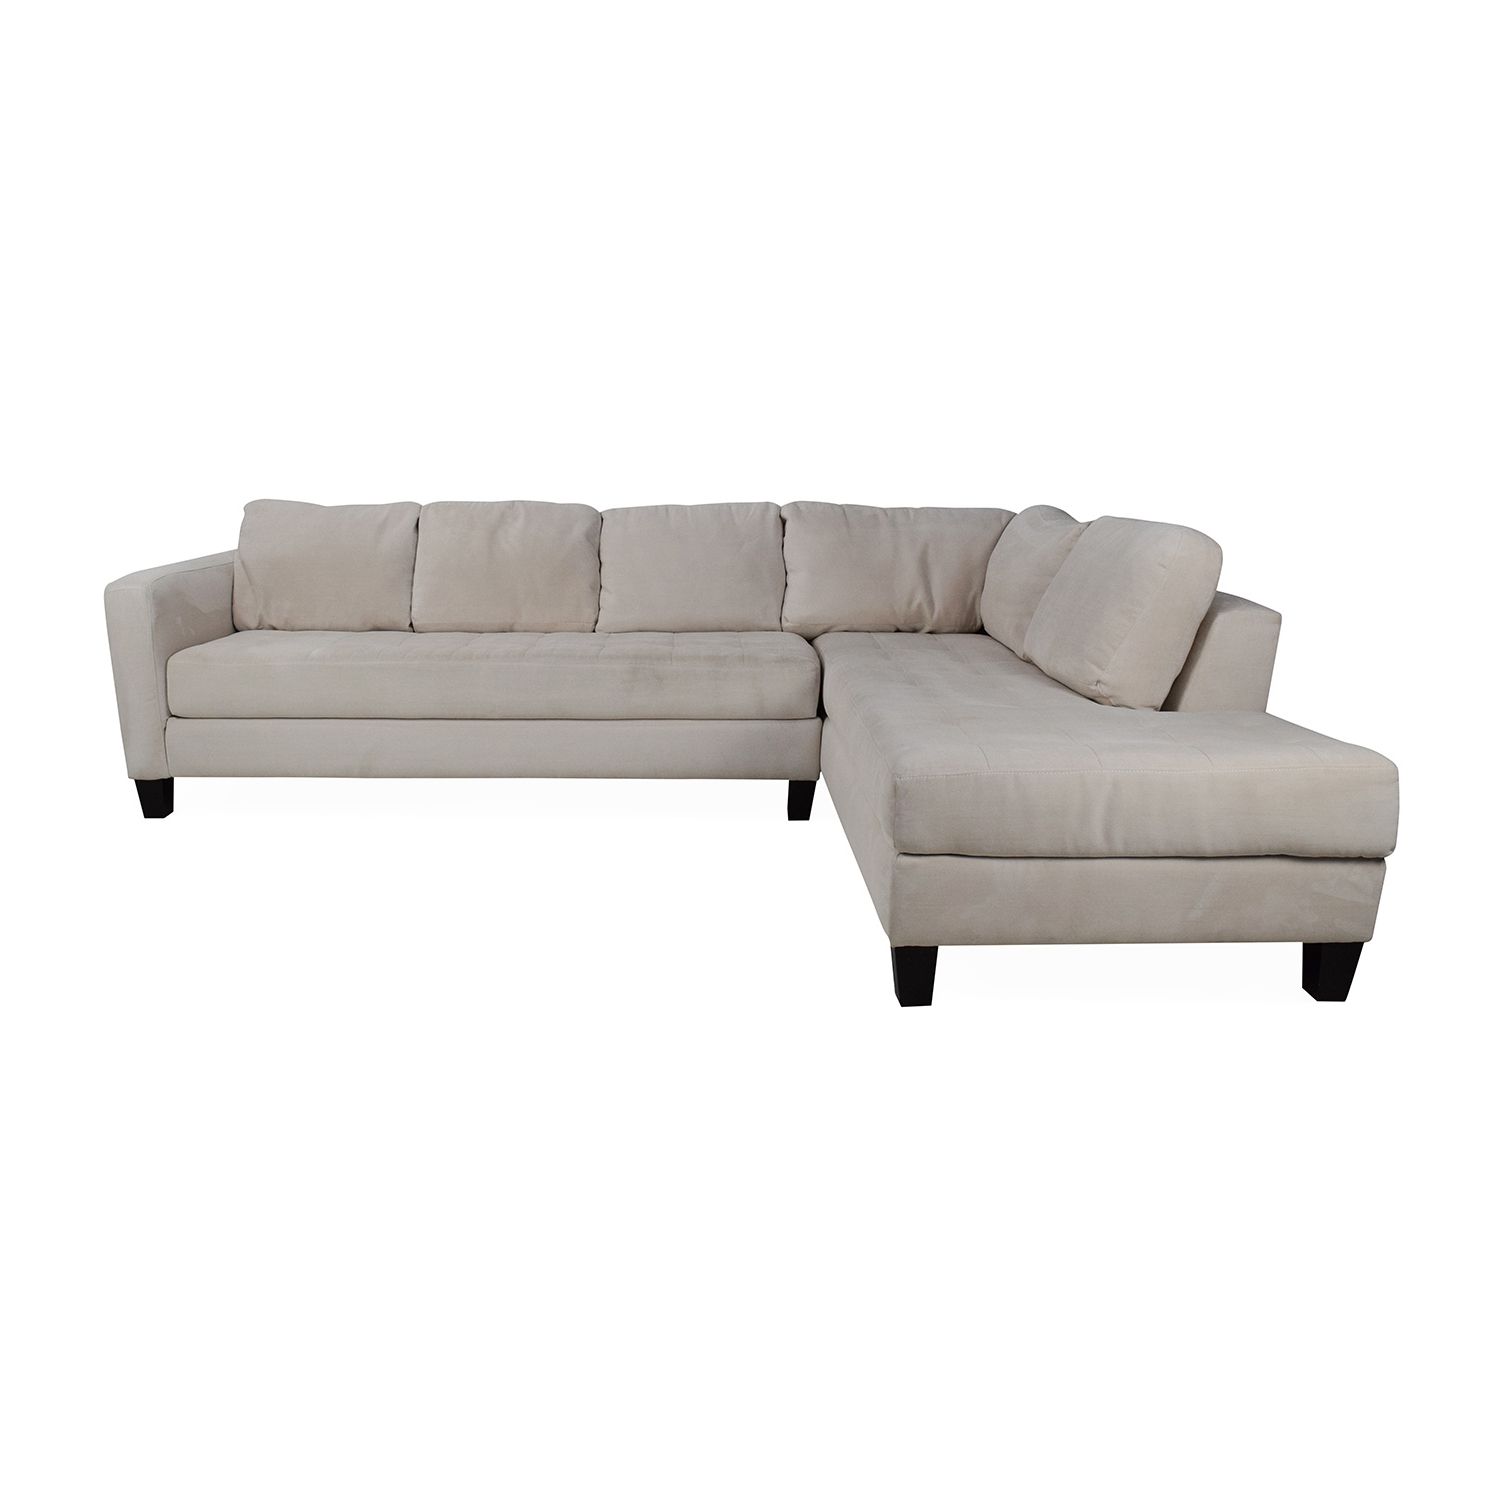 [%65% Off – Macy's Macy's Milo Fabric Microfiber Sectional / Sofas Within Latest Macys Sectional Sofas|macys Sectional Sofas Pertaining To Best And Newest 65% Off – Macy's Macy's Milo Fabric Microfiber Sectional / Sofas|fashionable Macys Sectional Sofas Regarding 65% Off – Macy's Macy's Milo Fabric Microfiber Sectional / Sofas|most Recently Released 65% Off – Macy's Macy's Milo Fabric Microfiber Sectional / Sofas Inside Macys Sectional Sofas%] (View 1 of 20)